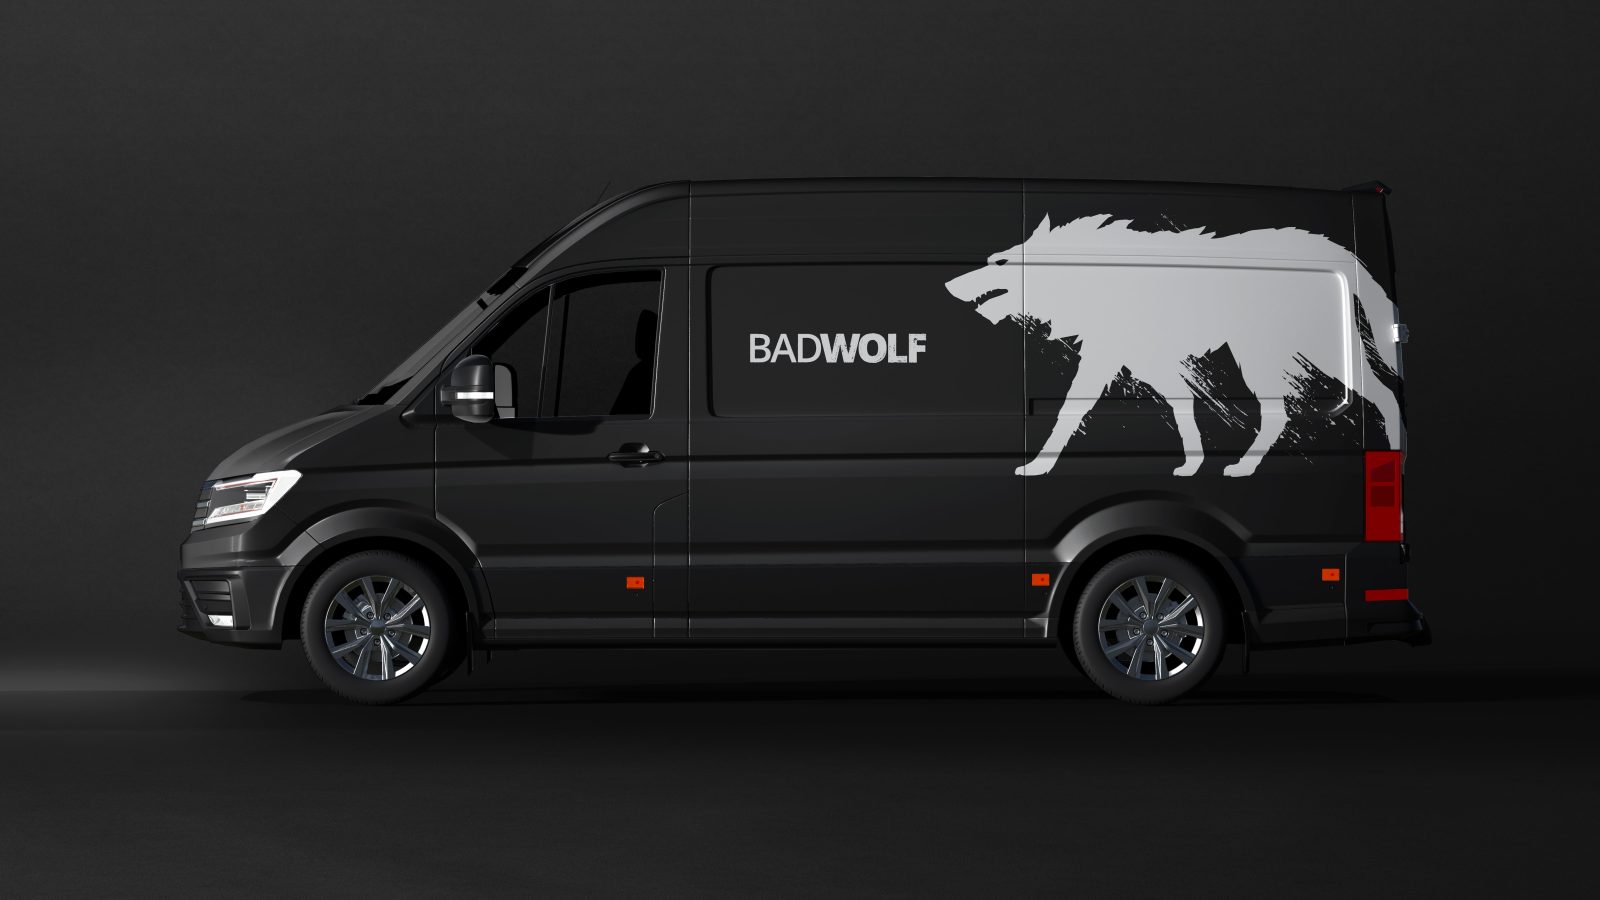 A black van parked against a dark background, featuring a large white wolf graphic and the text 